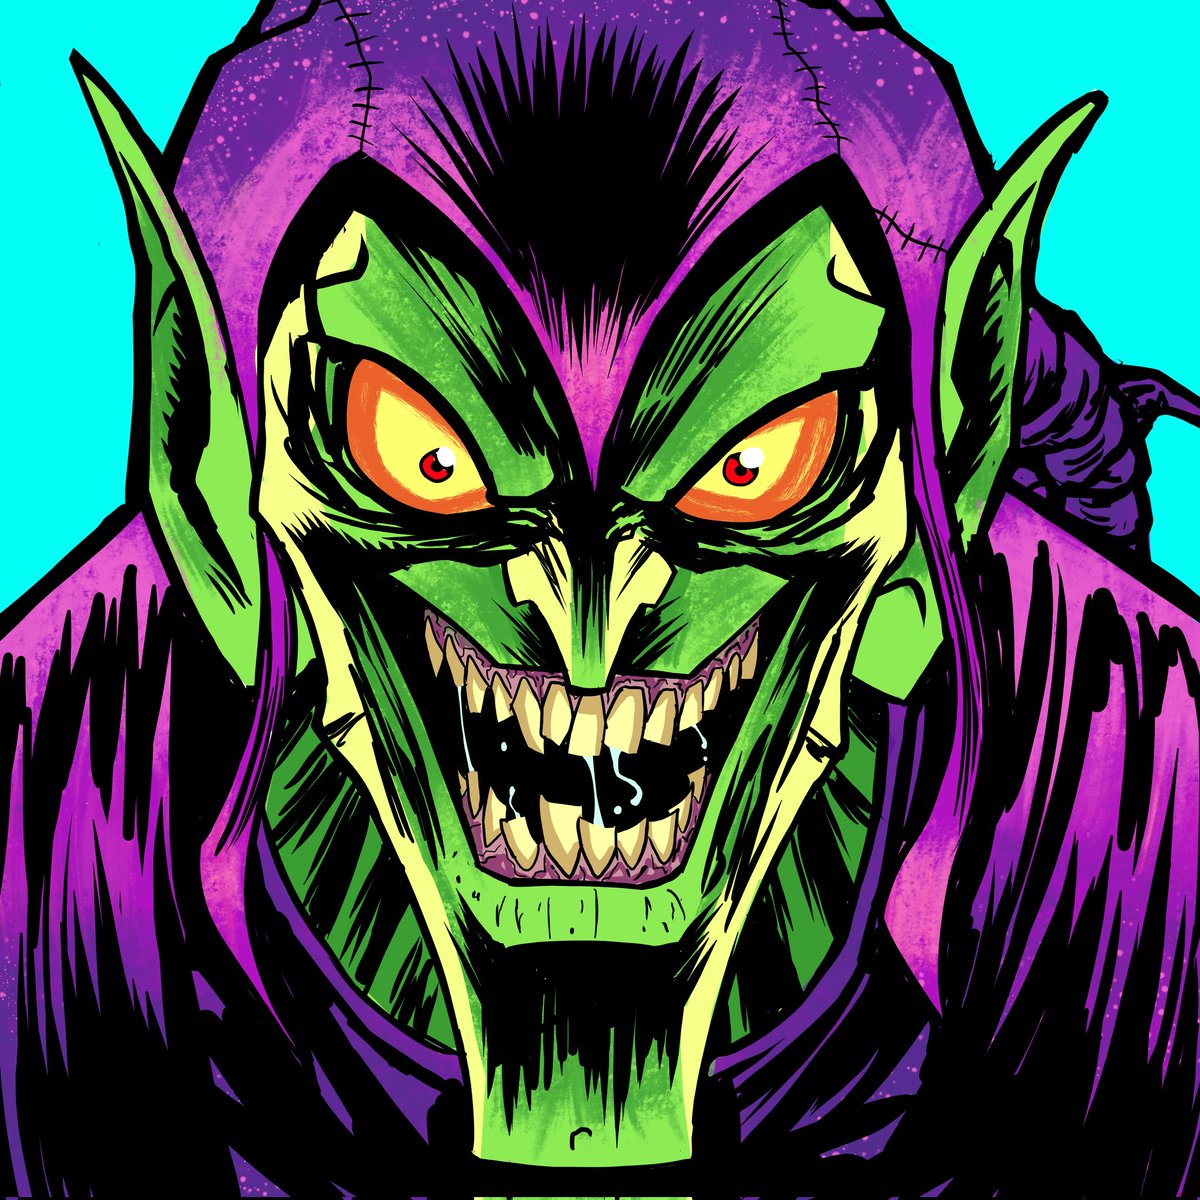 The Green Goblin is really too cool to draw #SpiderMan.